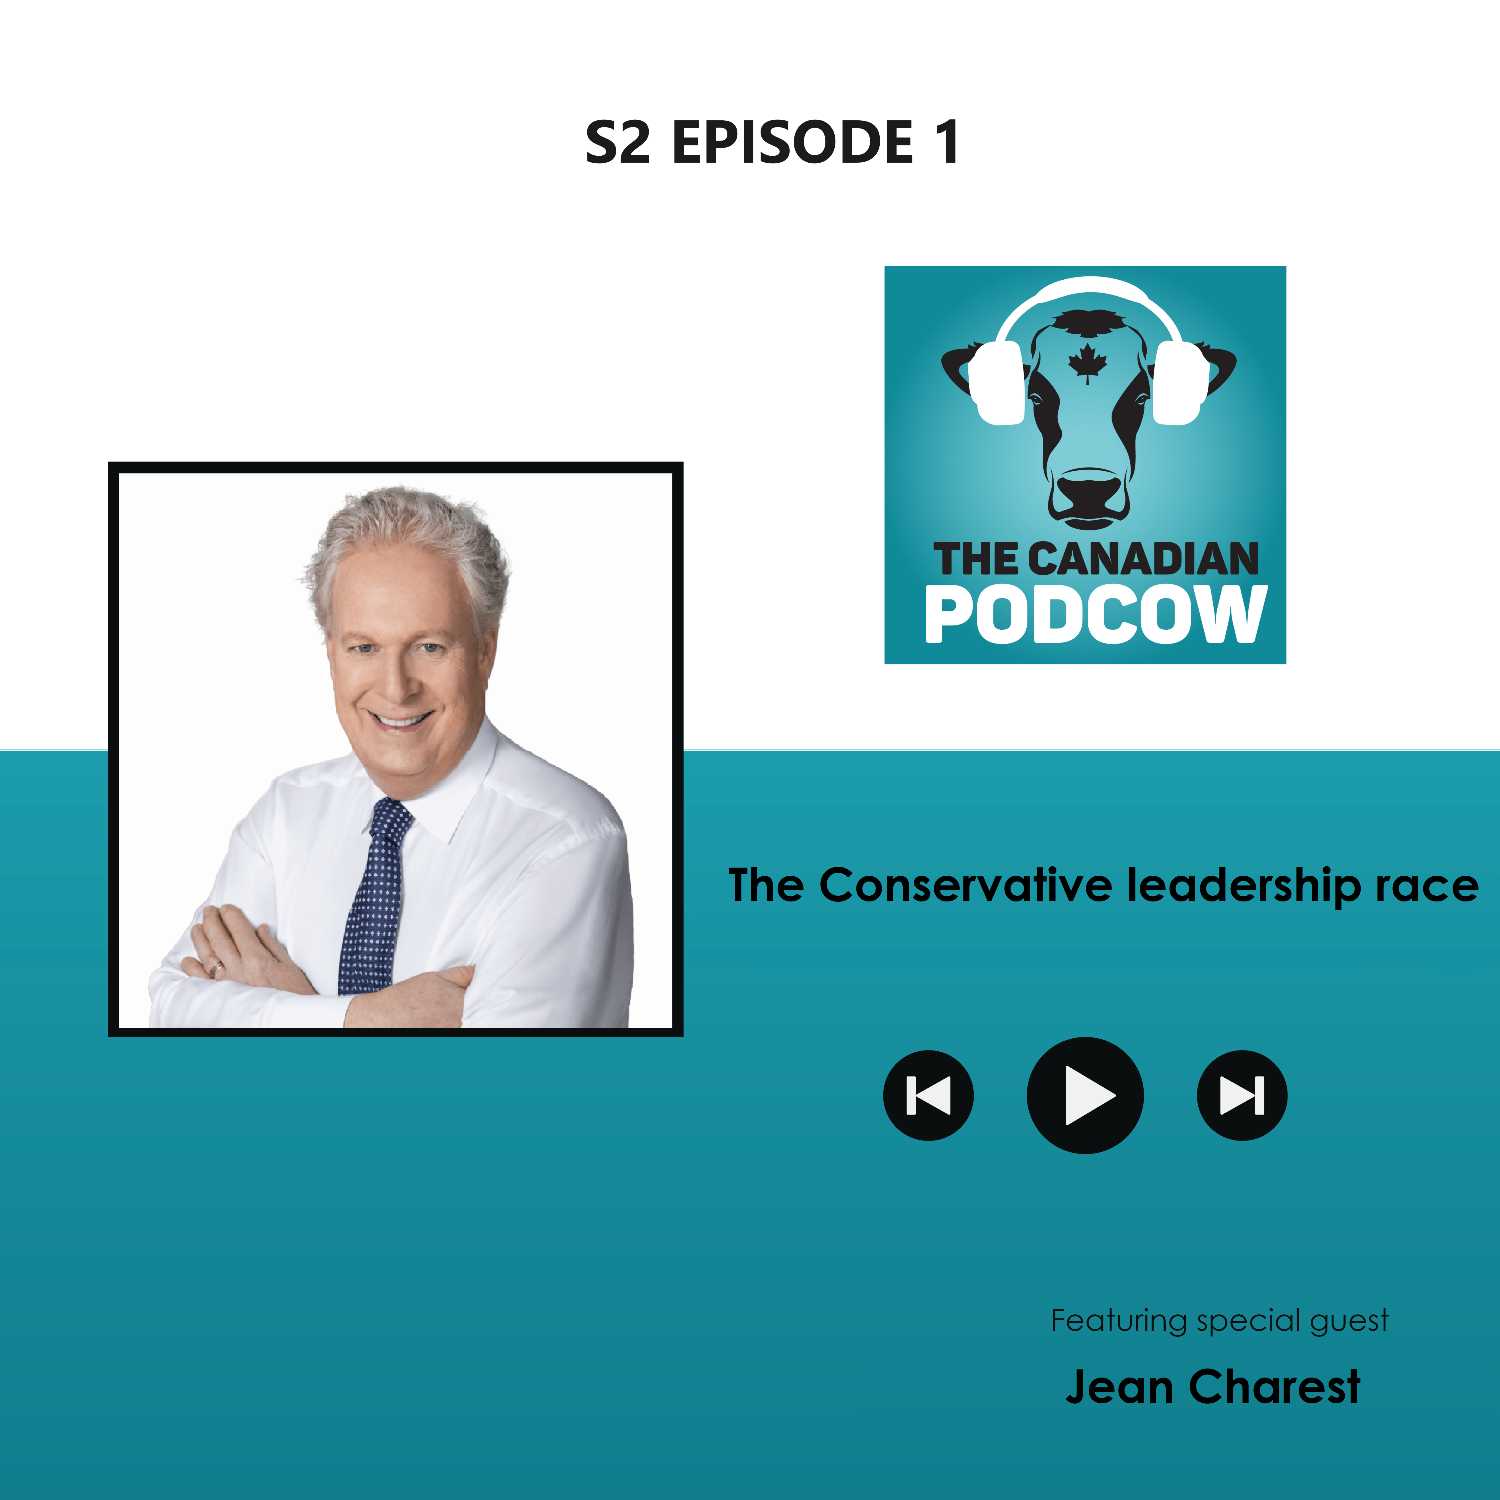 The Conservative Leadership Race